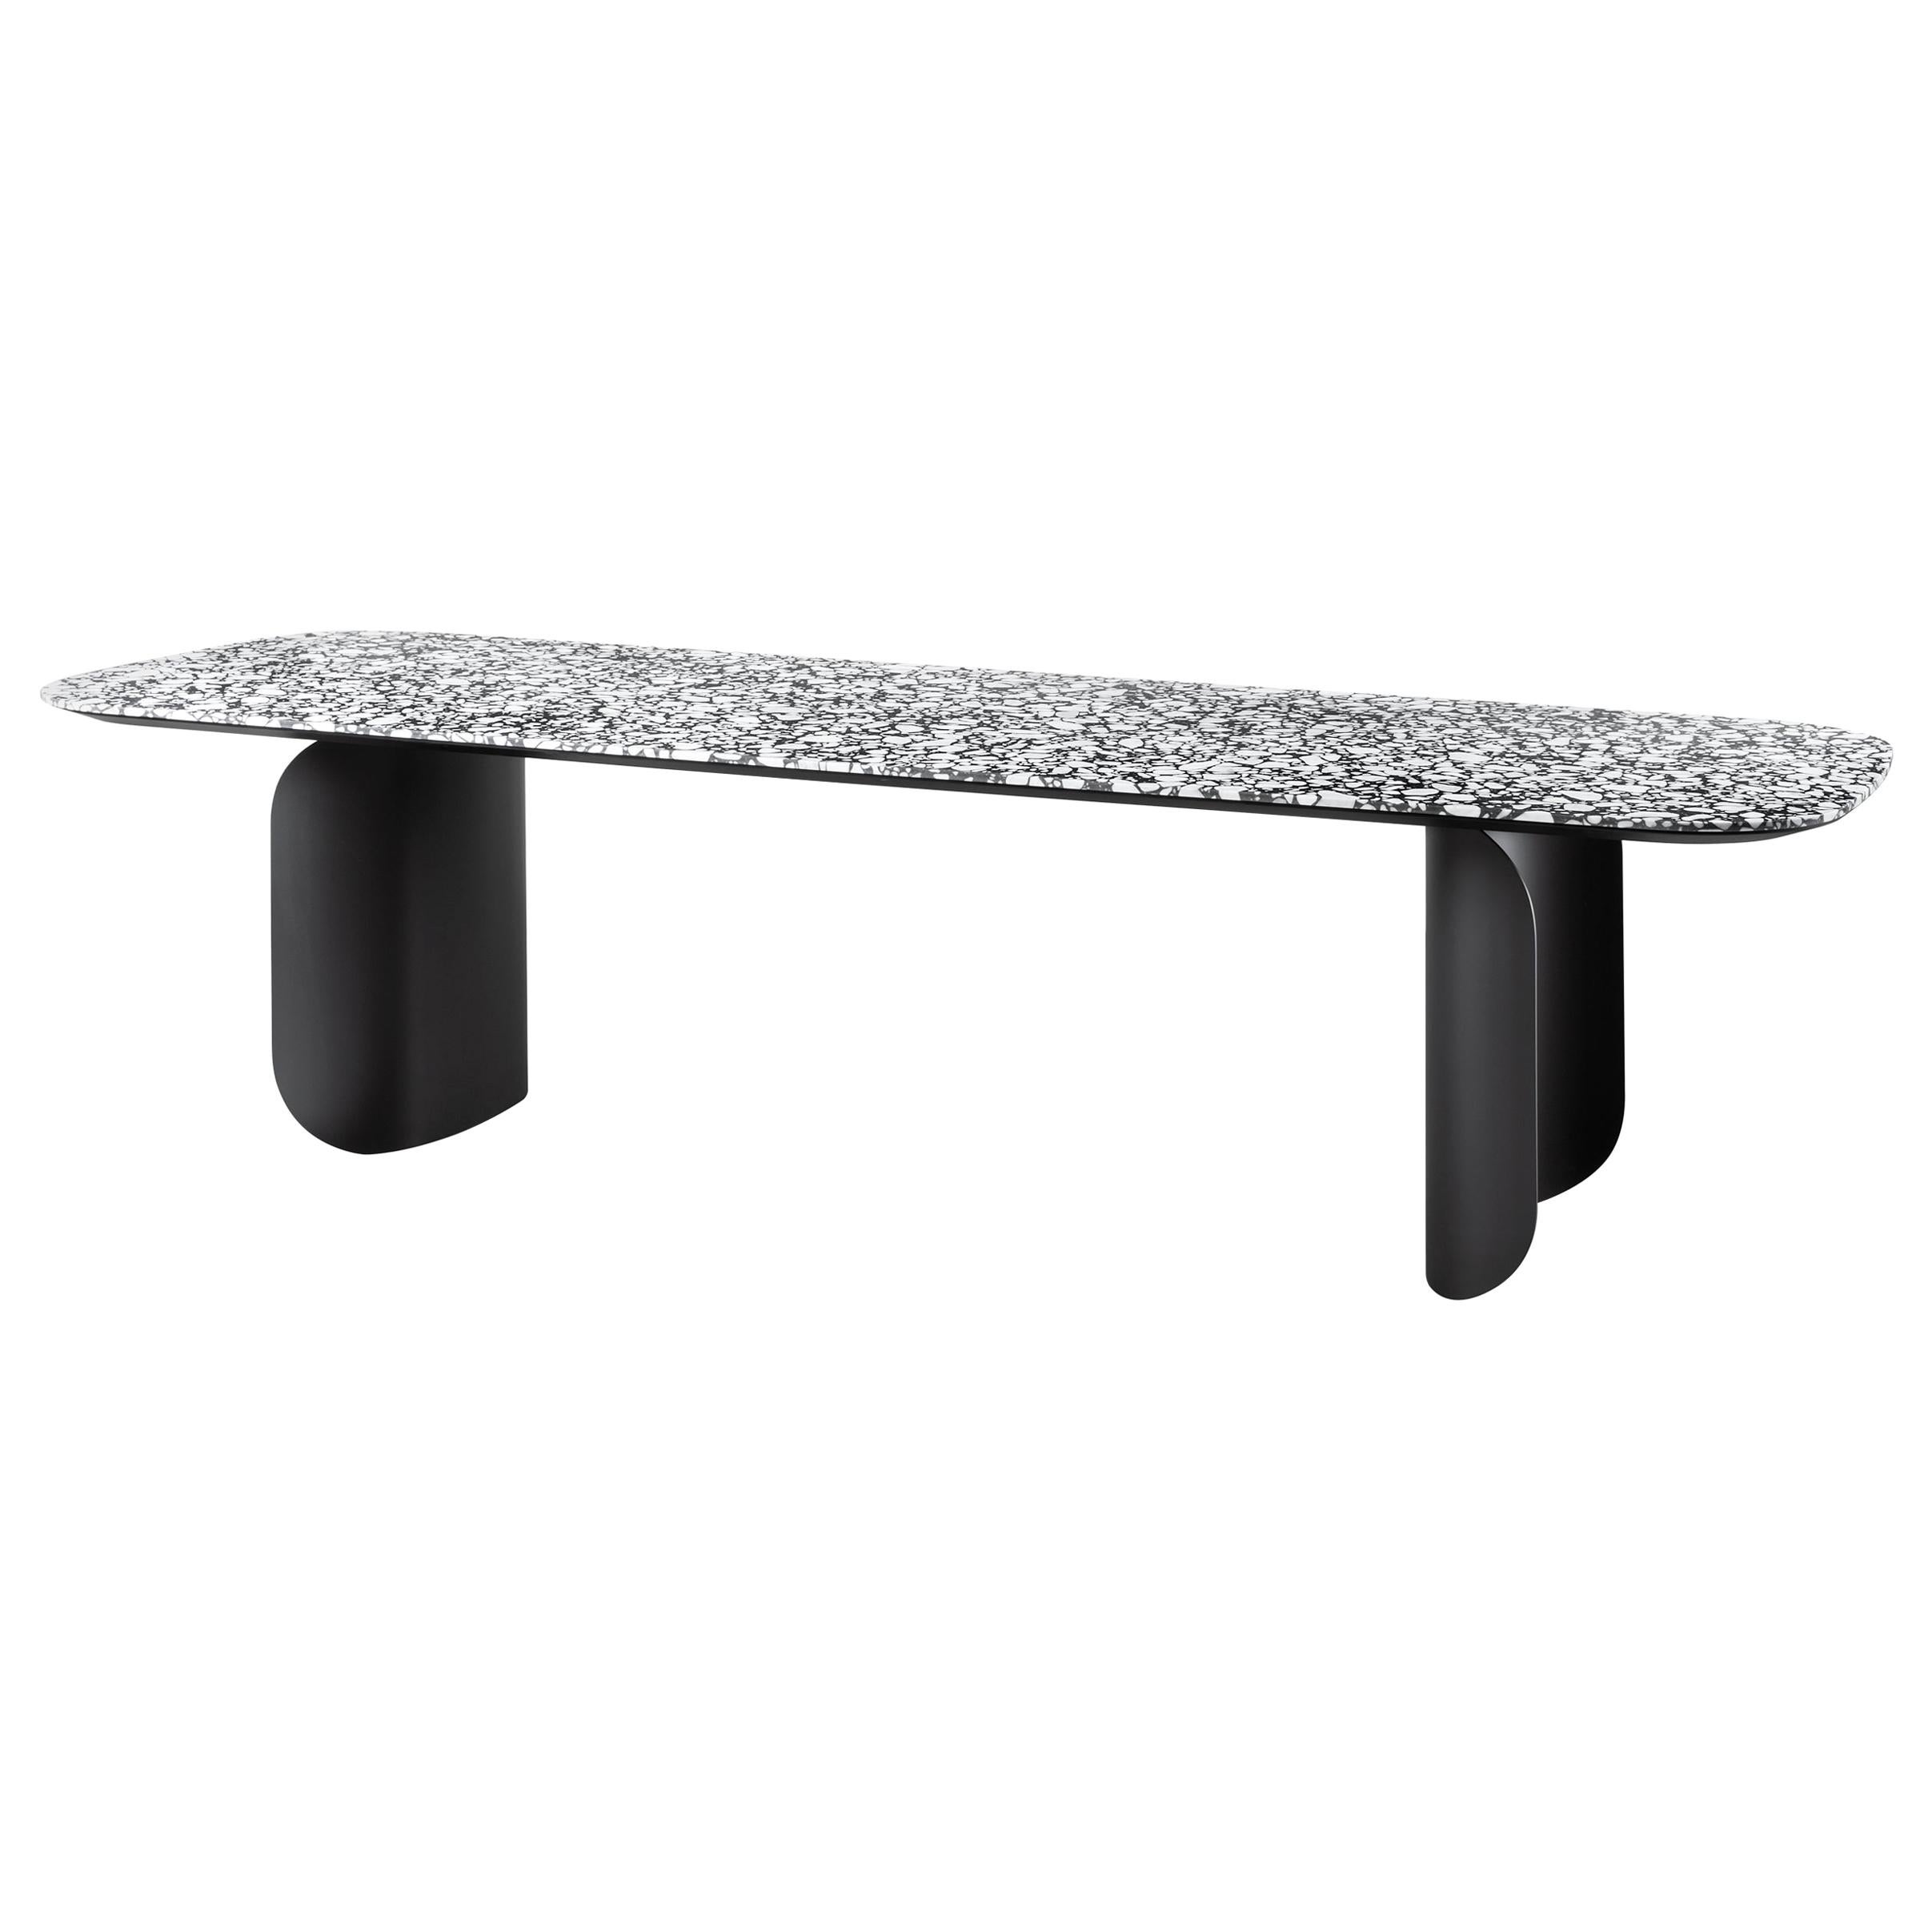 Barry Medium Table in Palladio Moro Top with Black Lacquered Base by Alain 